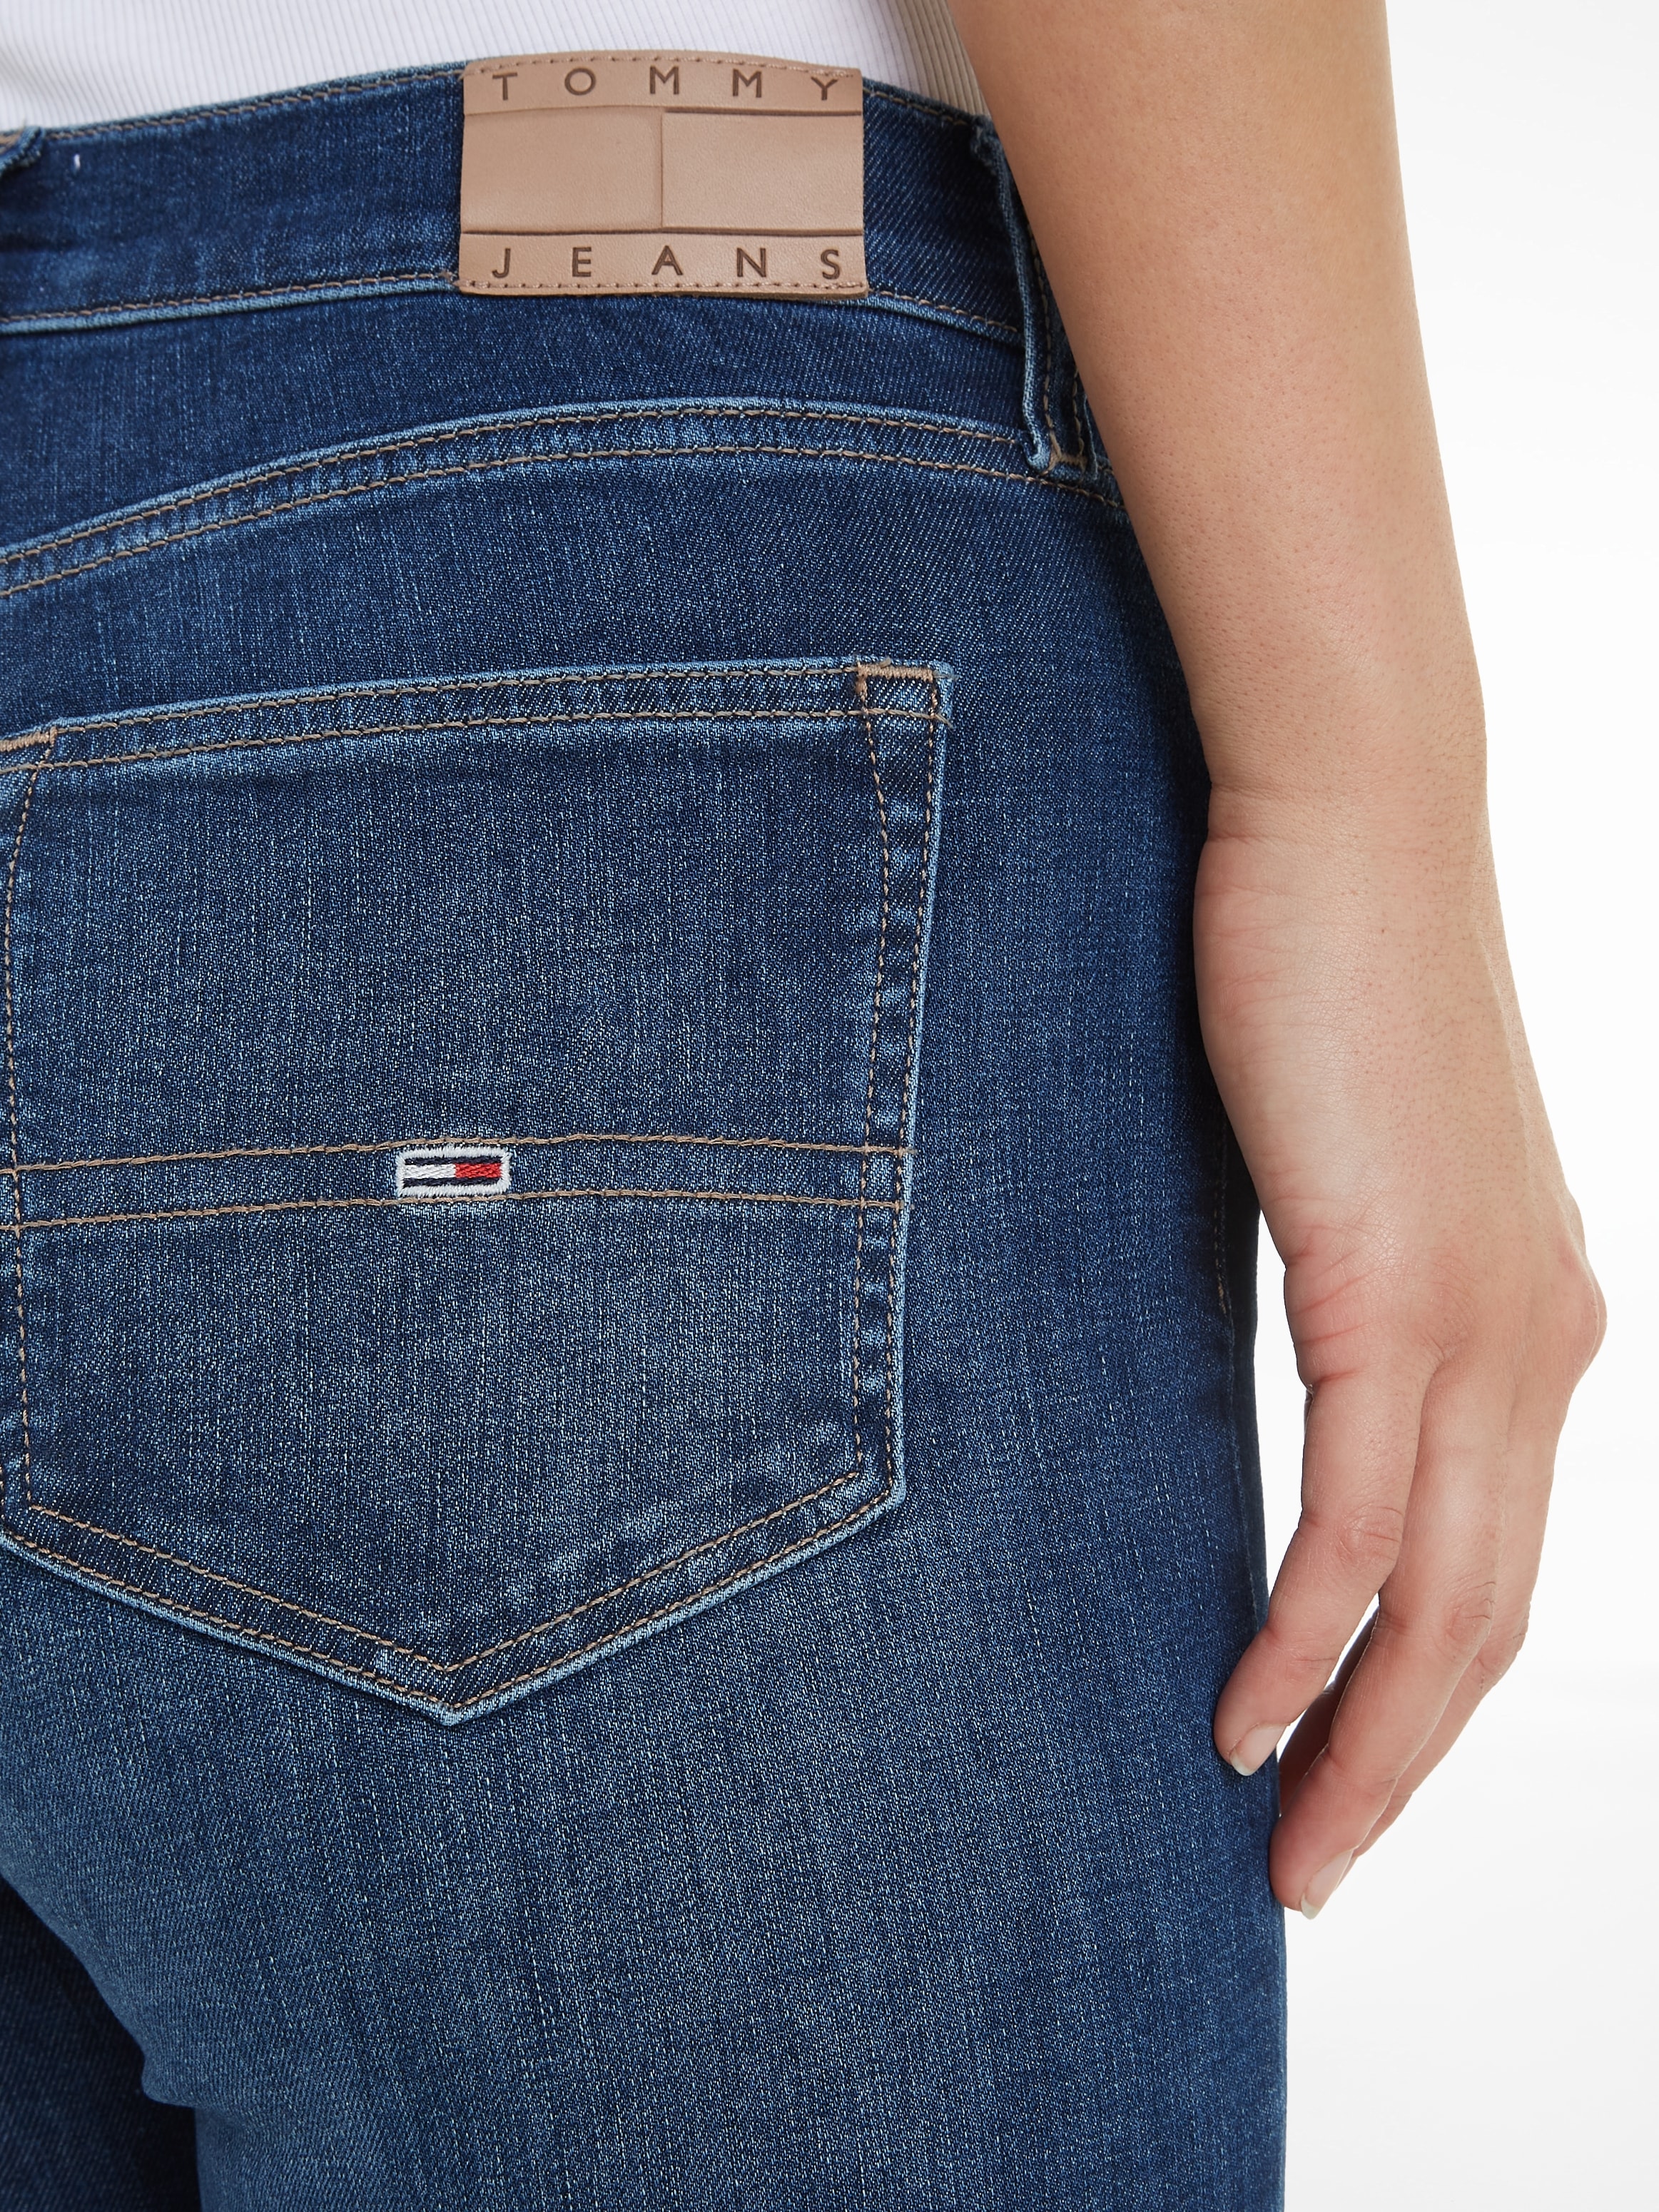 Markenlabel Bequeme bei Tommy »Sylvia«, ♕ Jeans mit Jeans